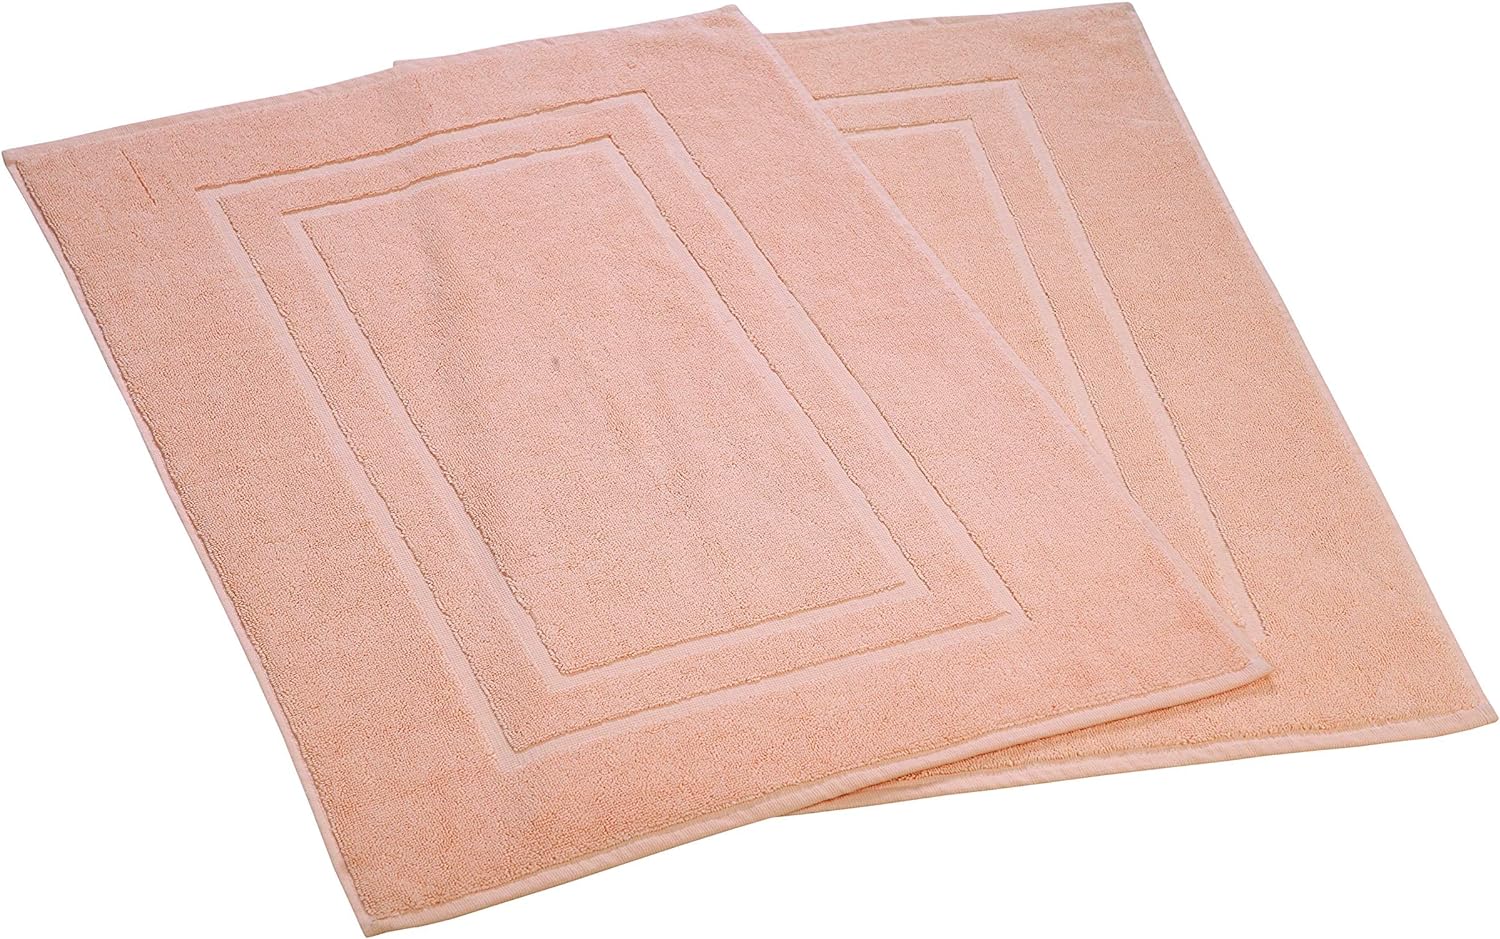 Feather  Stitch 2 Piece Towel Like Bath Mats (30x21 Inch) 100% Cotton Terry Mat, Non-Slip Hotel, Spa, Shower Floor Mats [NOT A Bathroom Rug], Soft Absorbent Washable Mats- Pale Peach